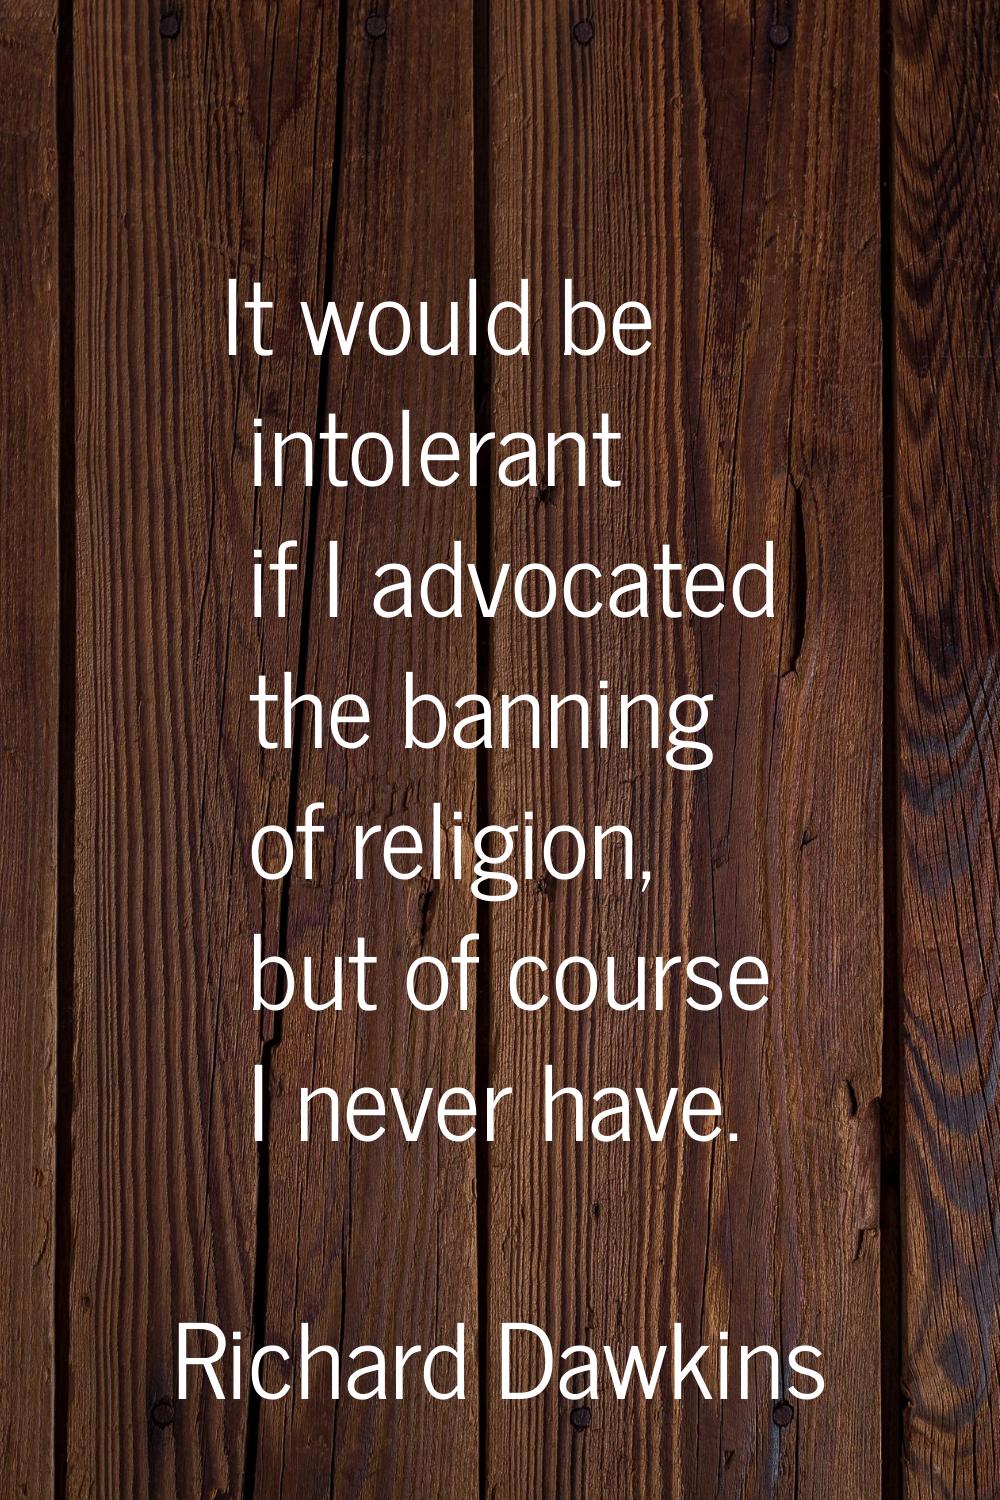 It would be intolerant if I advocated the banning of religion, but of course I never have.